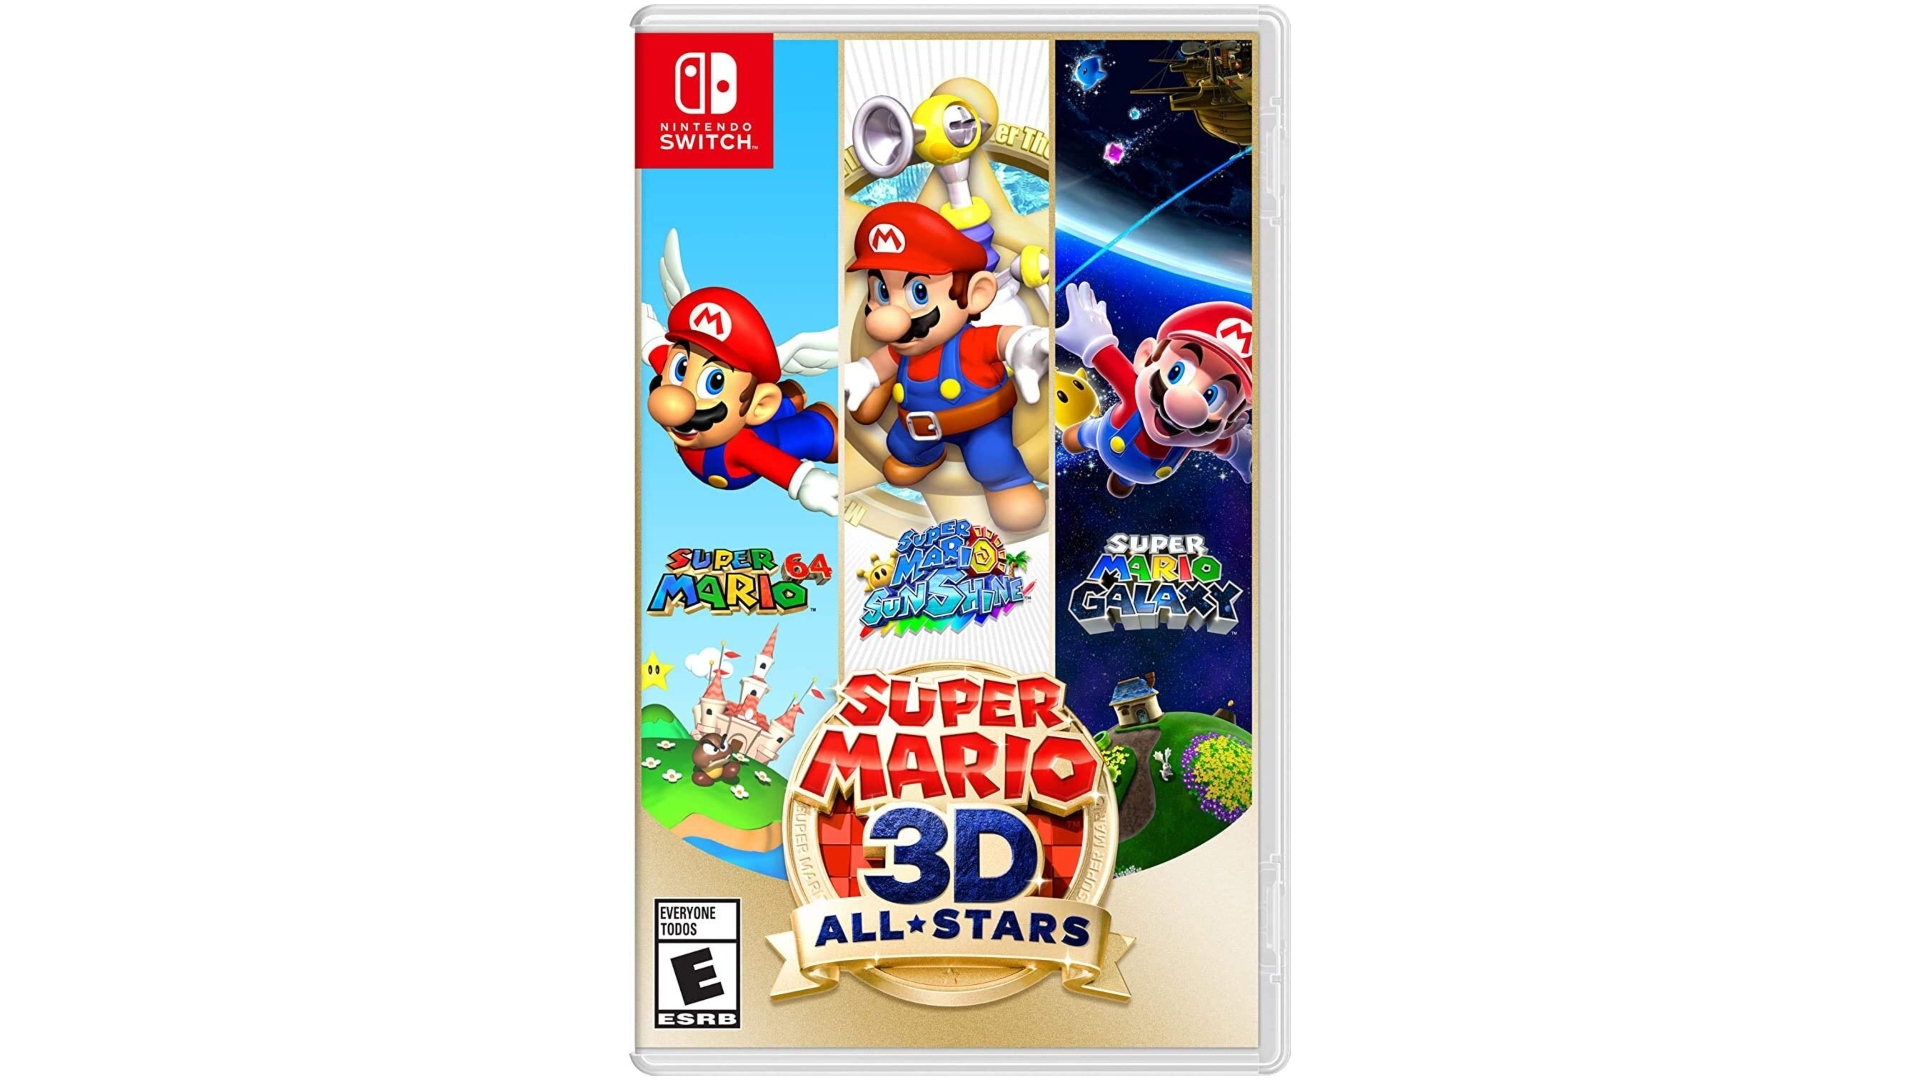 Super Mario 3D All-Stars is still available brand new on